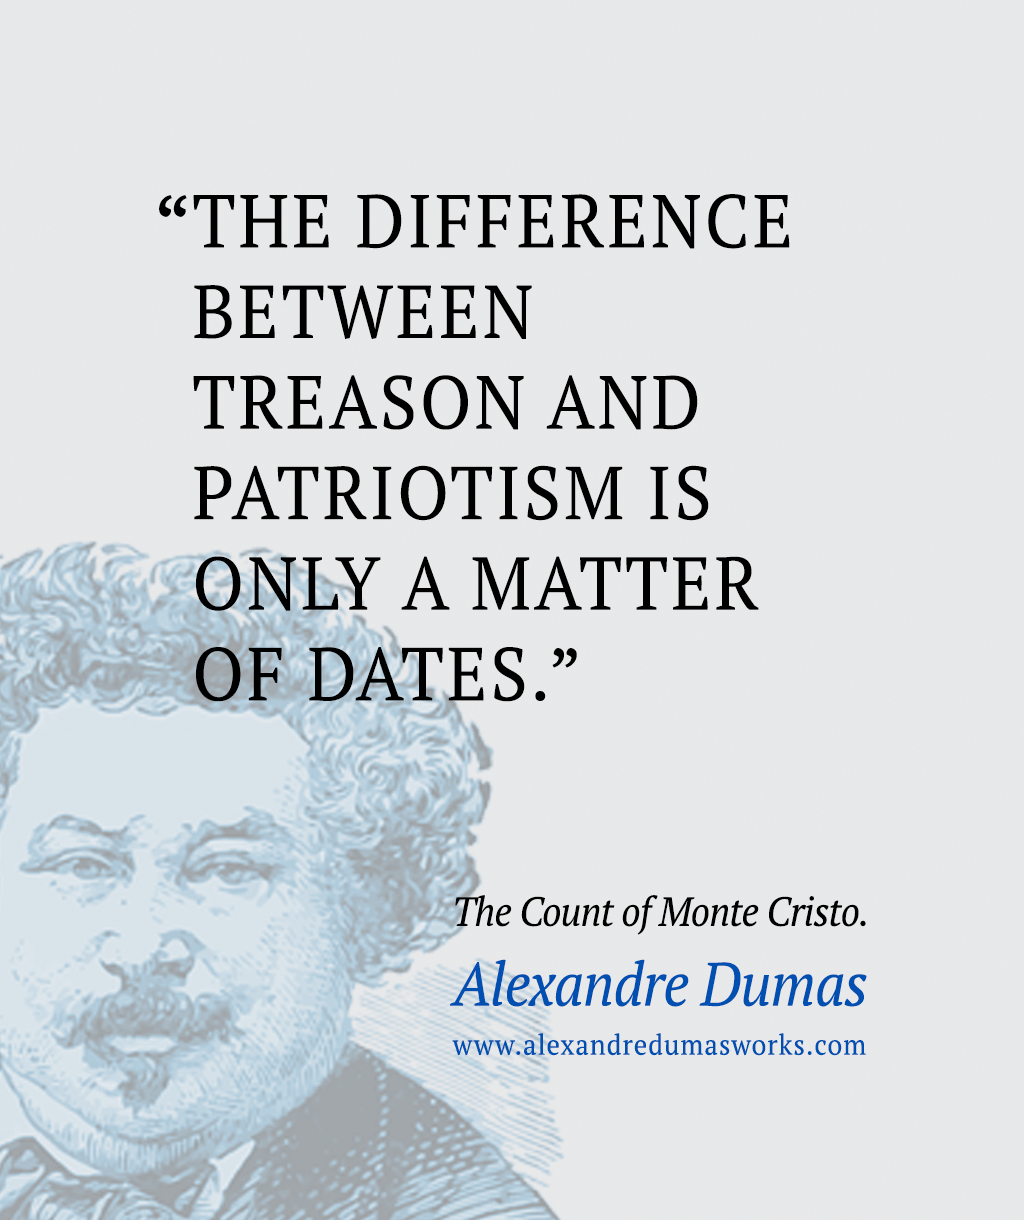 “The difference between treason and patriotism is only a matter of dates.” ― Alexandre Dumas, The Count of Monte Cristo